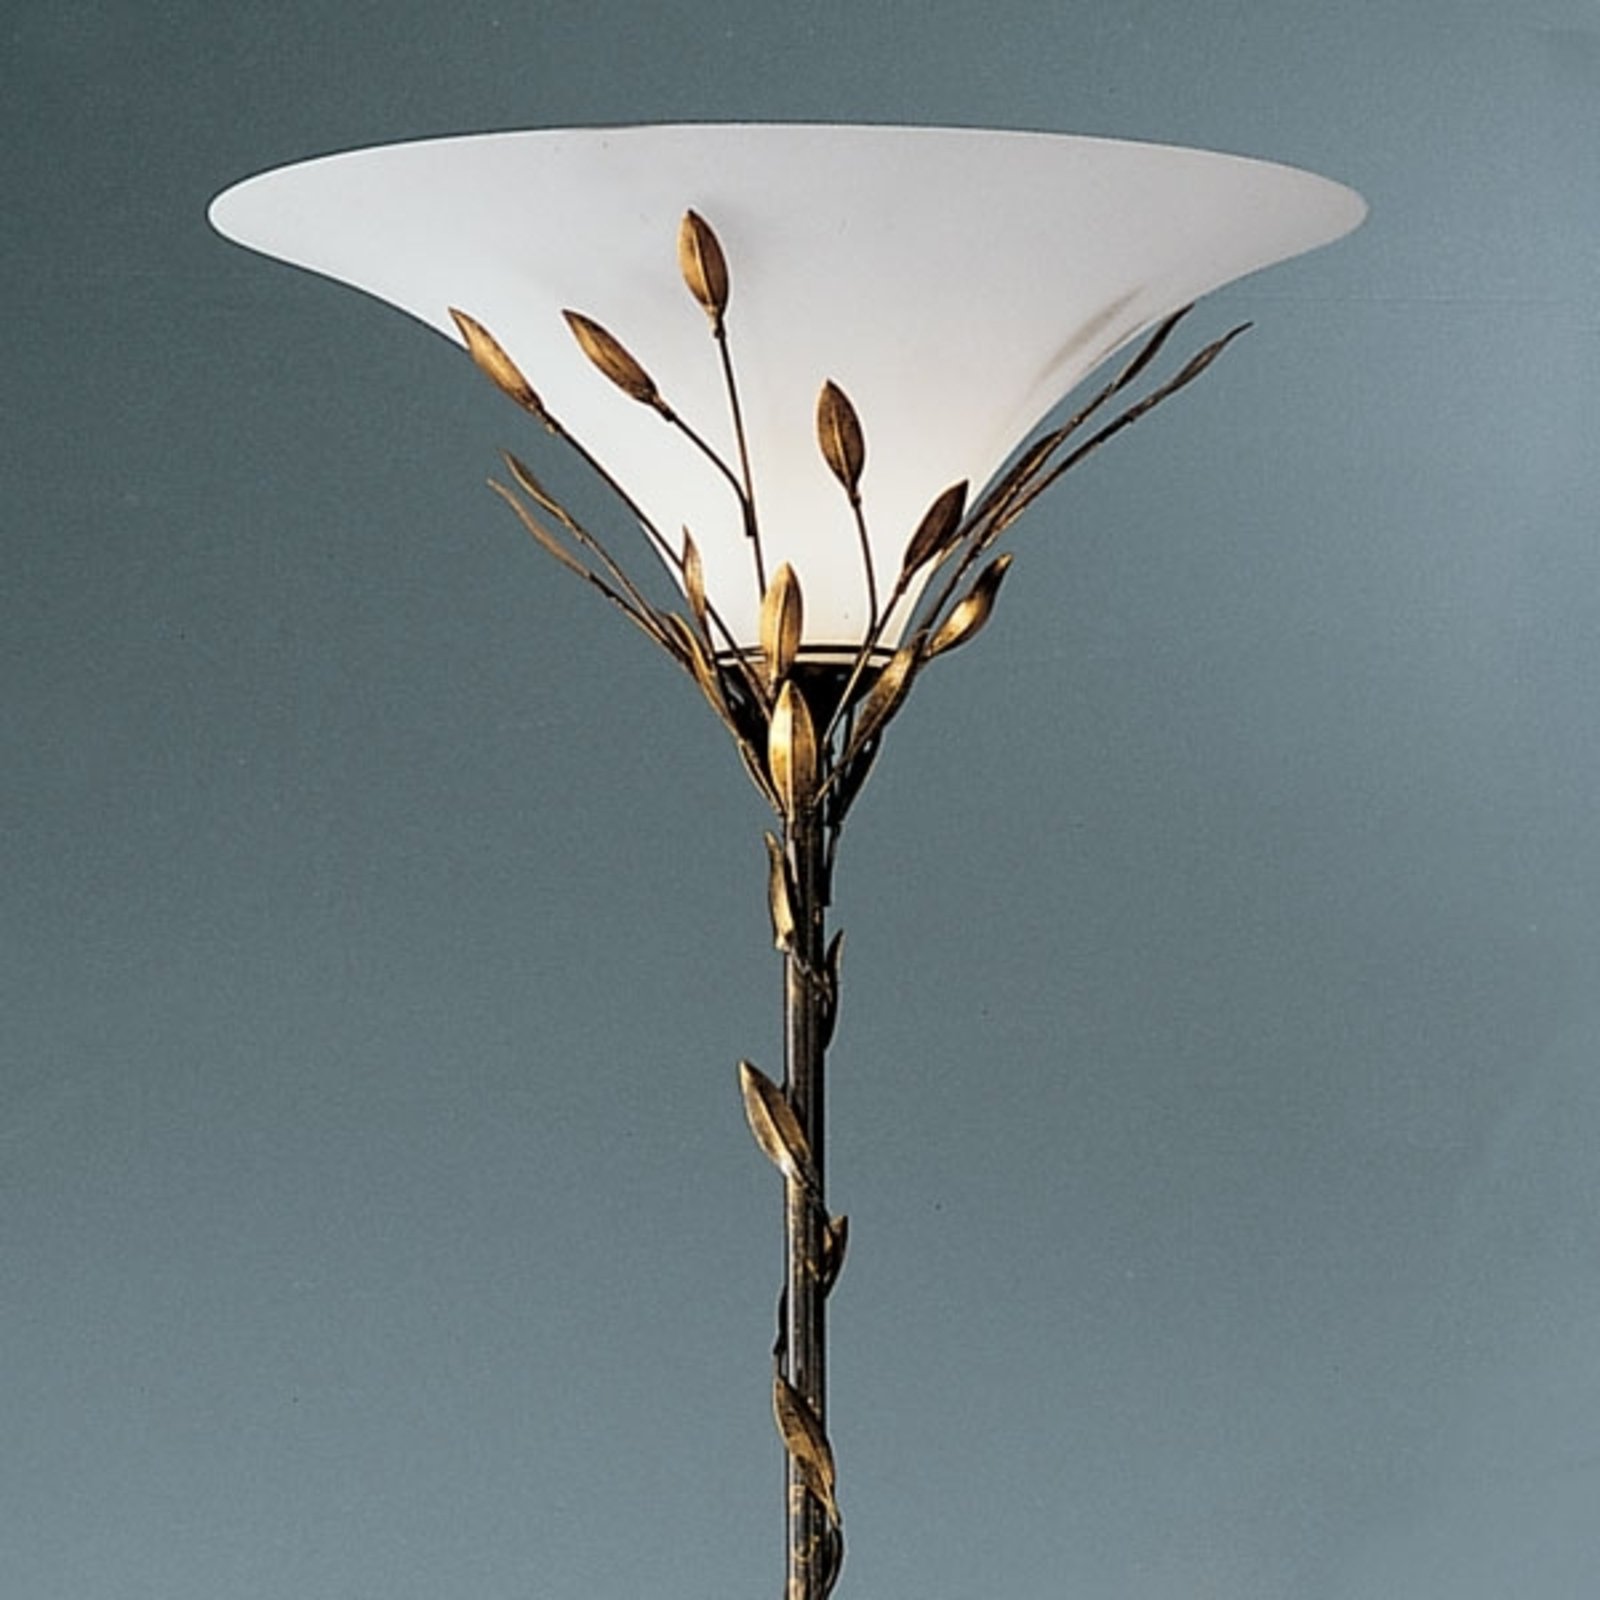 Floor lamp Campana by Uta Kögl - with dimmer